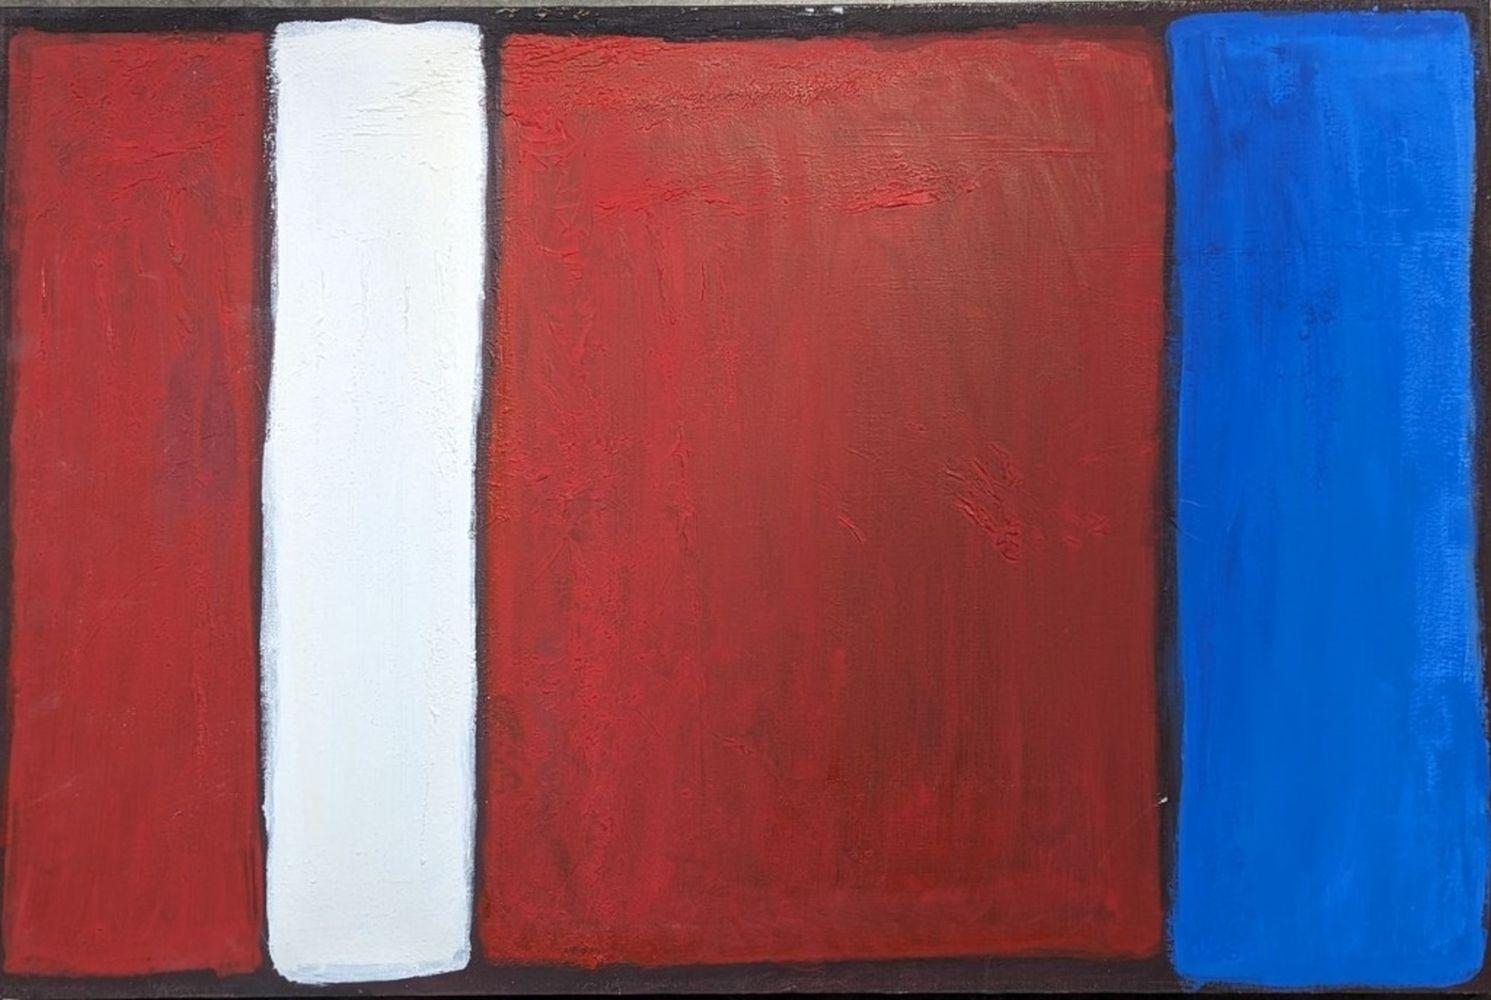 Artwork by Mark Rothko, Original in the Manner of Mark Rothko, Made of Oil on canvas